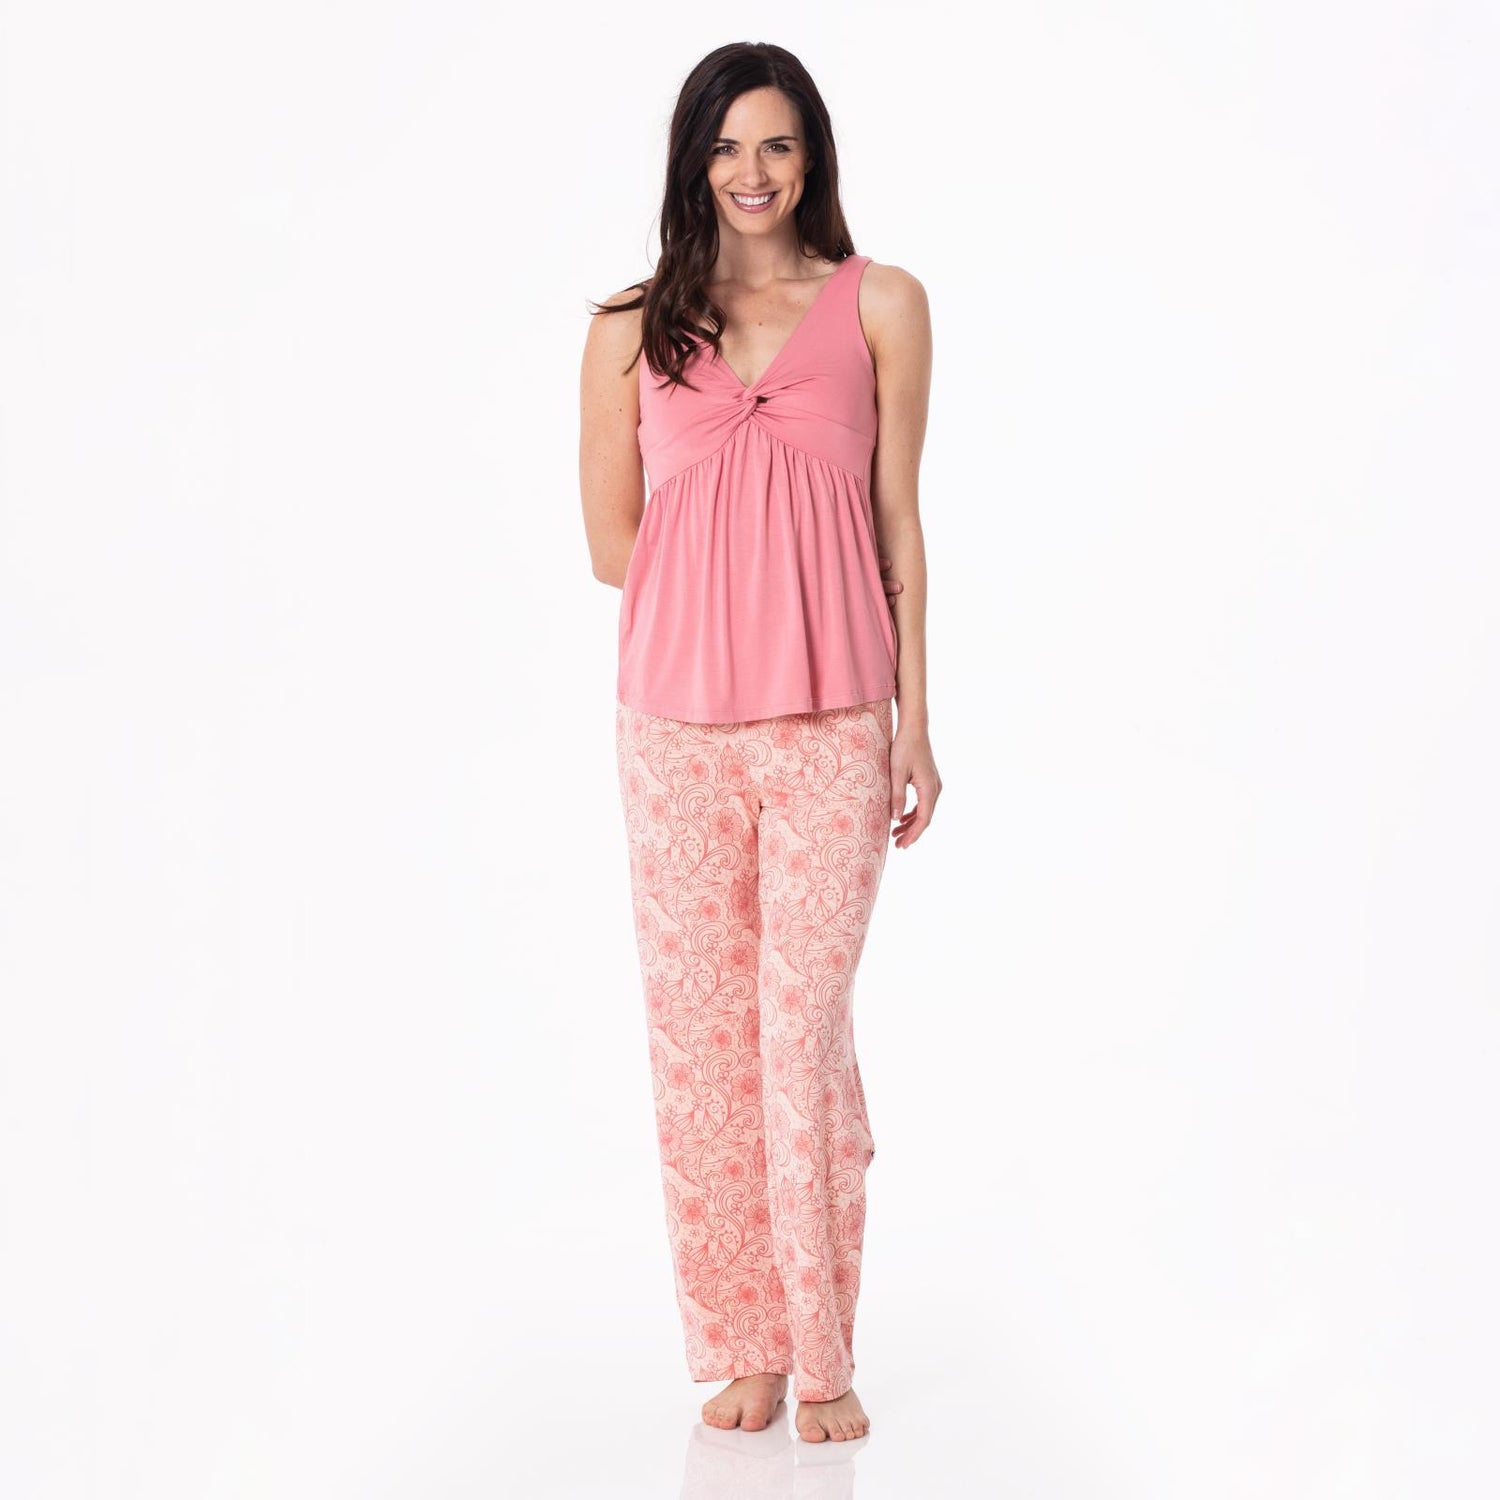 Women's Print Twist Tank and Pajama Pants Set in Peach Blossom Lace